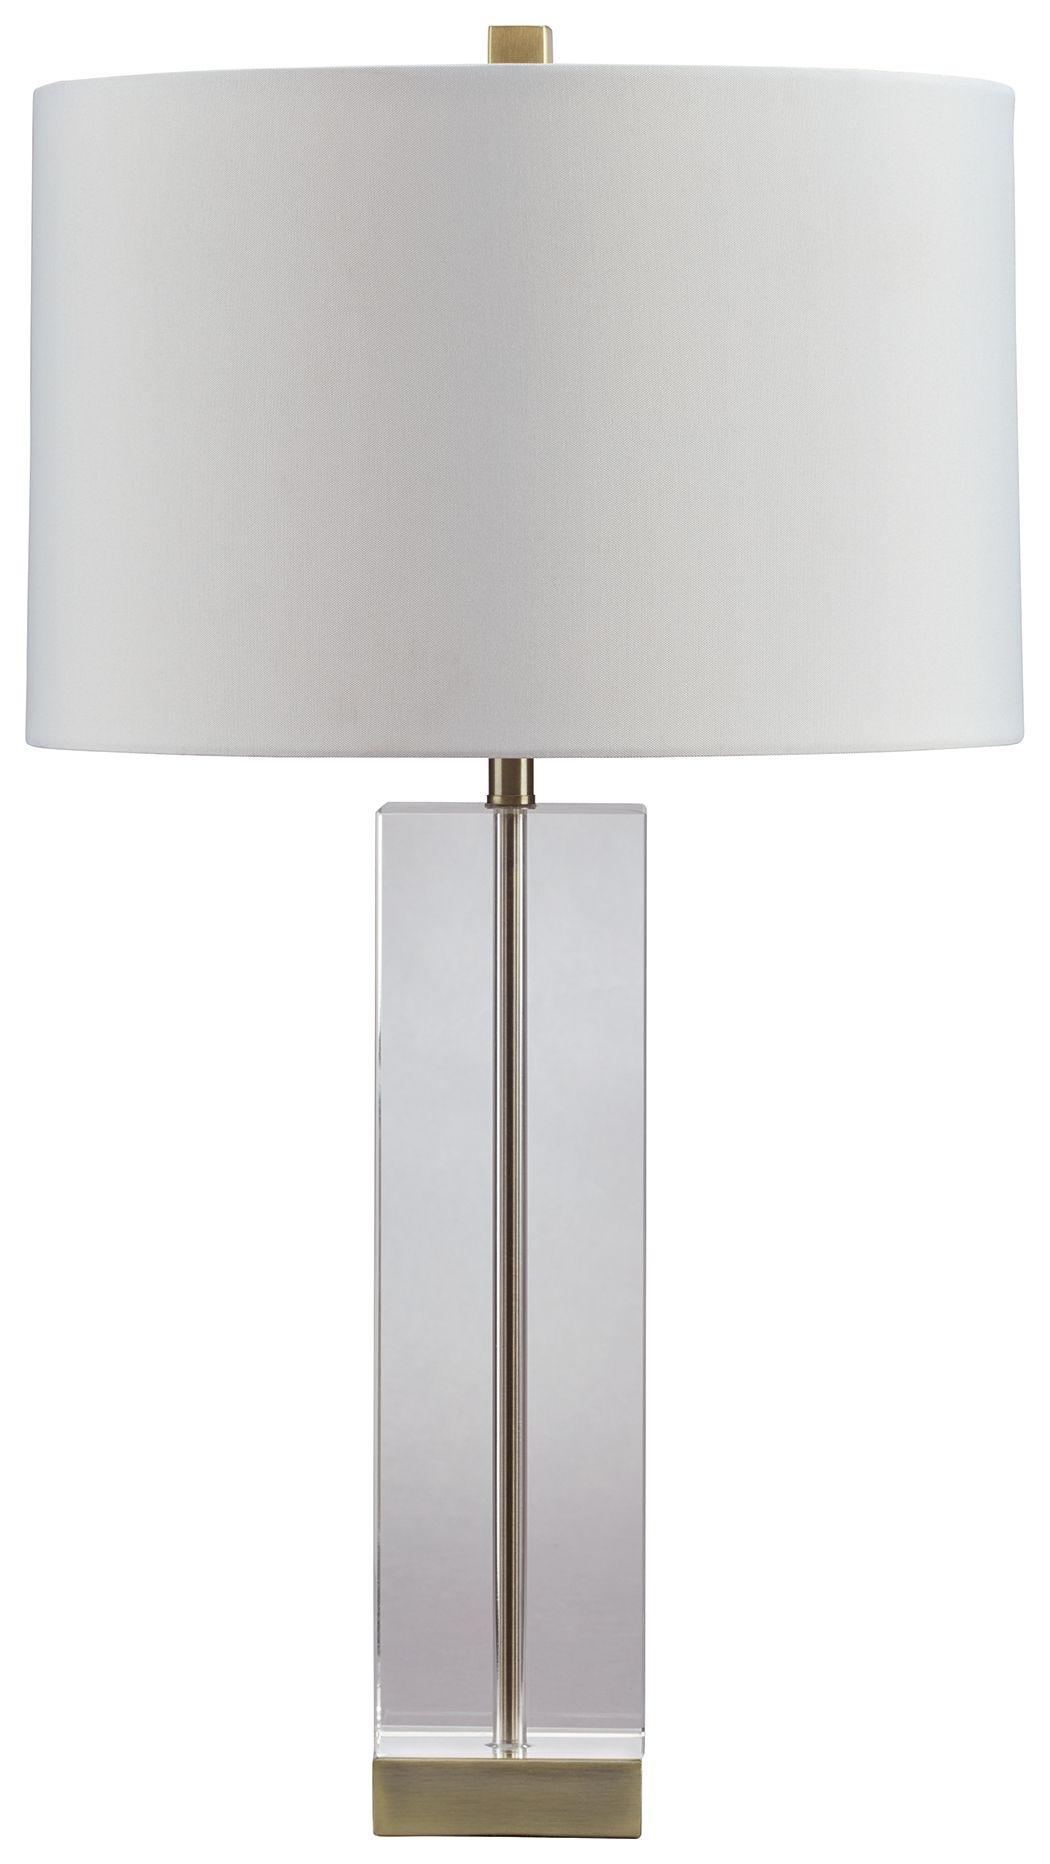 Ashley Furniture - Teelsen - Clear / Gold Finish - Crystal Table Lamp - 5th Avenue Furniture